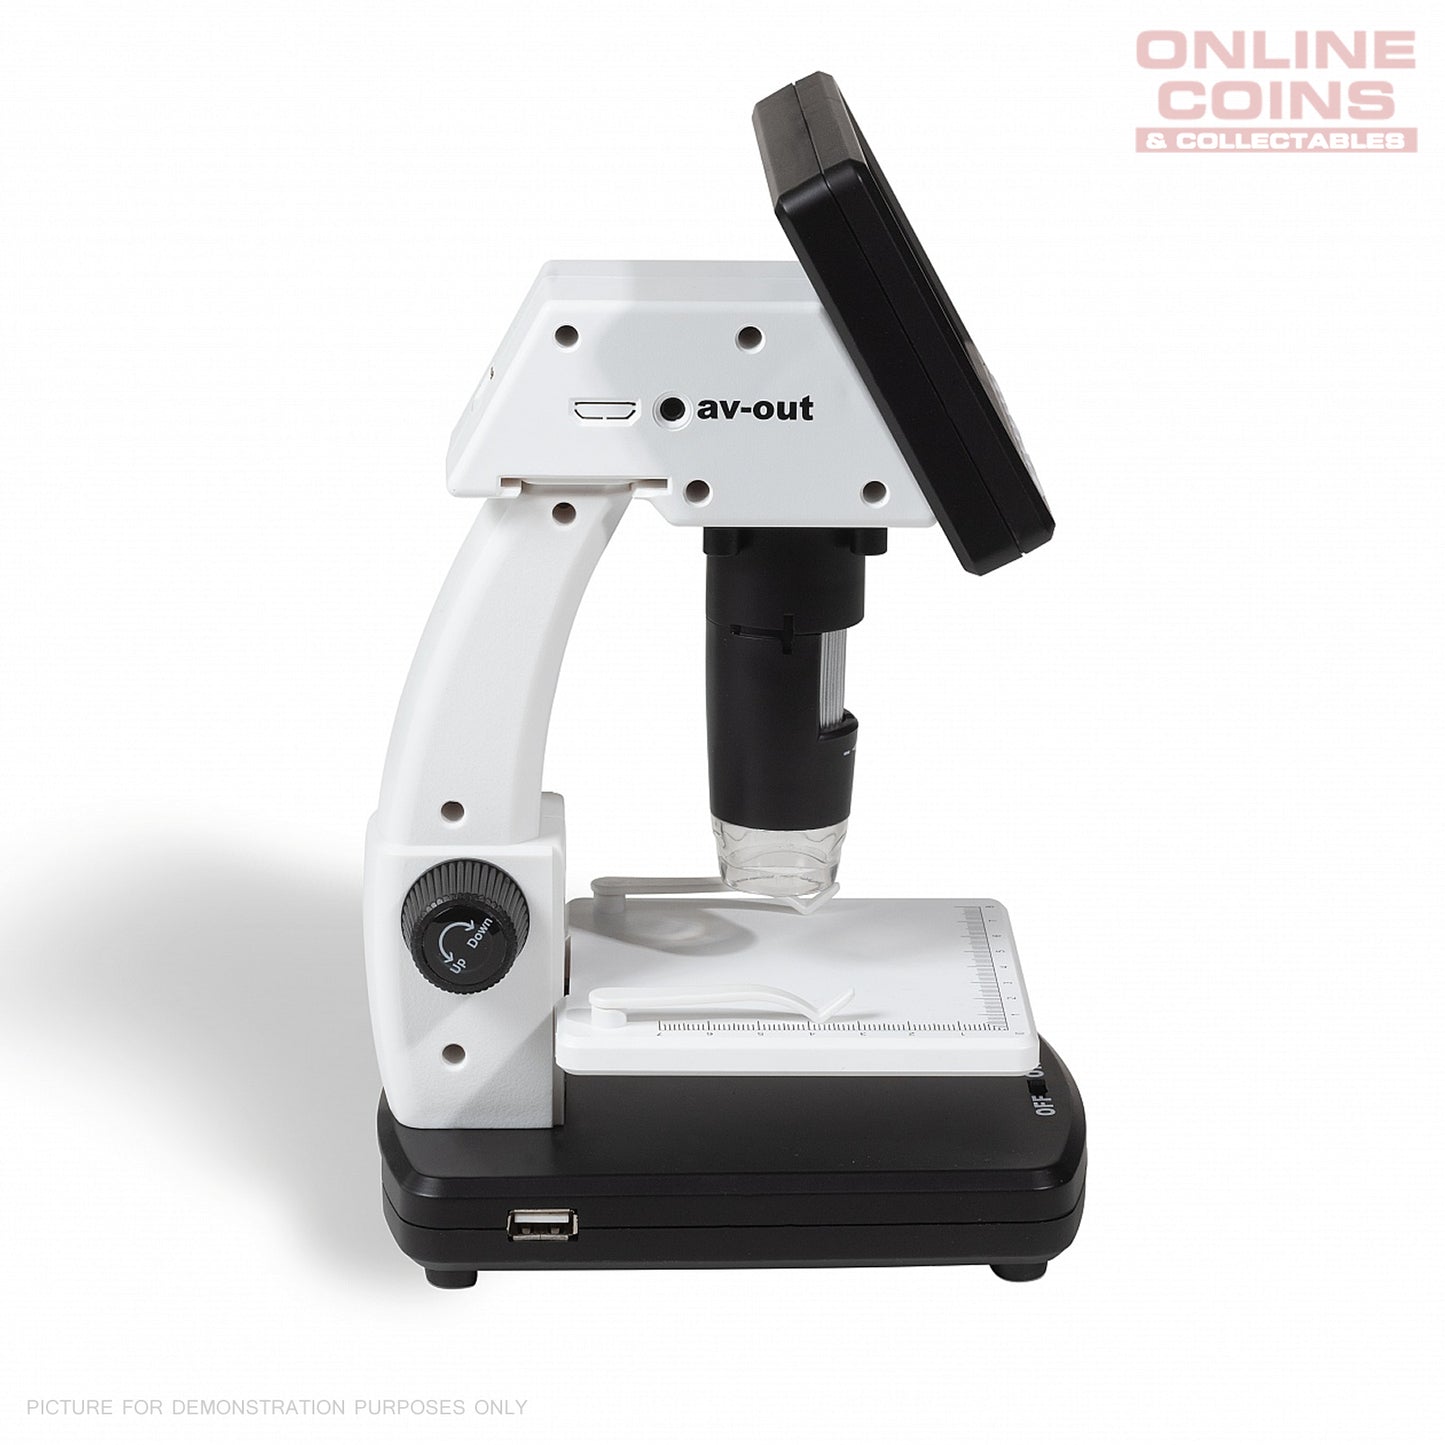 Lighthouse DM5 LCD Digital Microscope - 20x to 200x Magnification